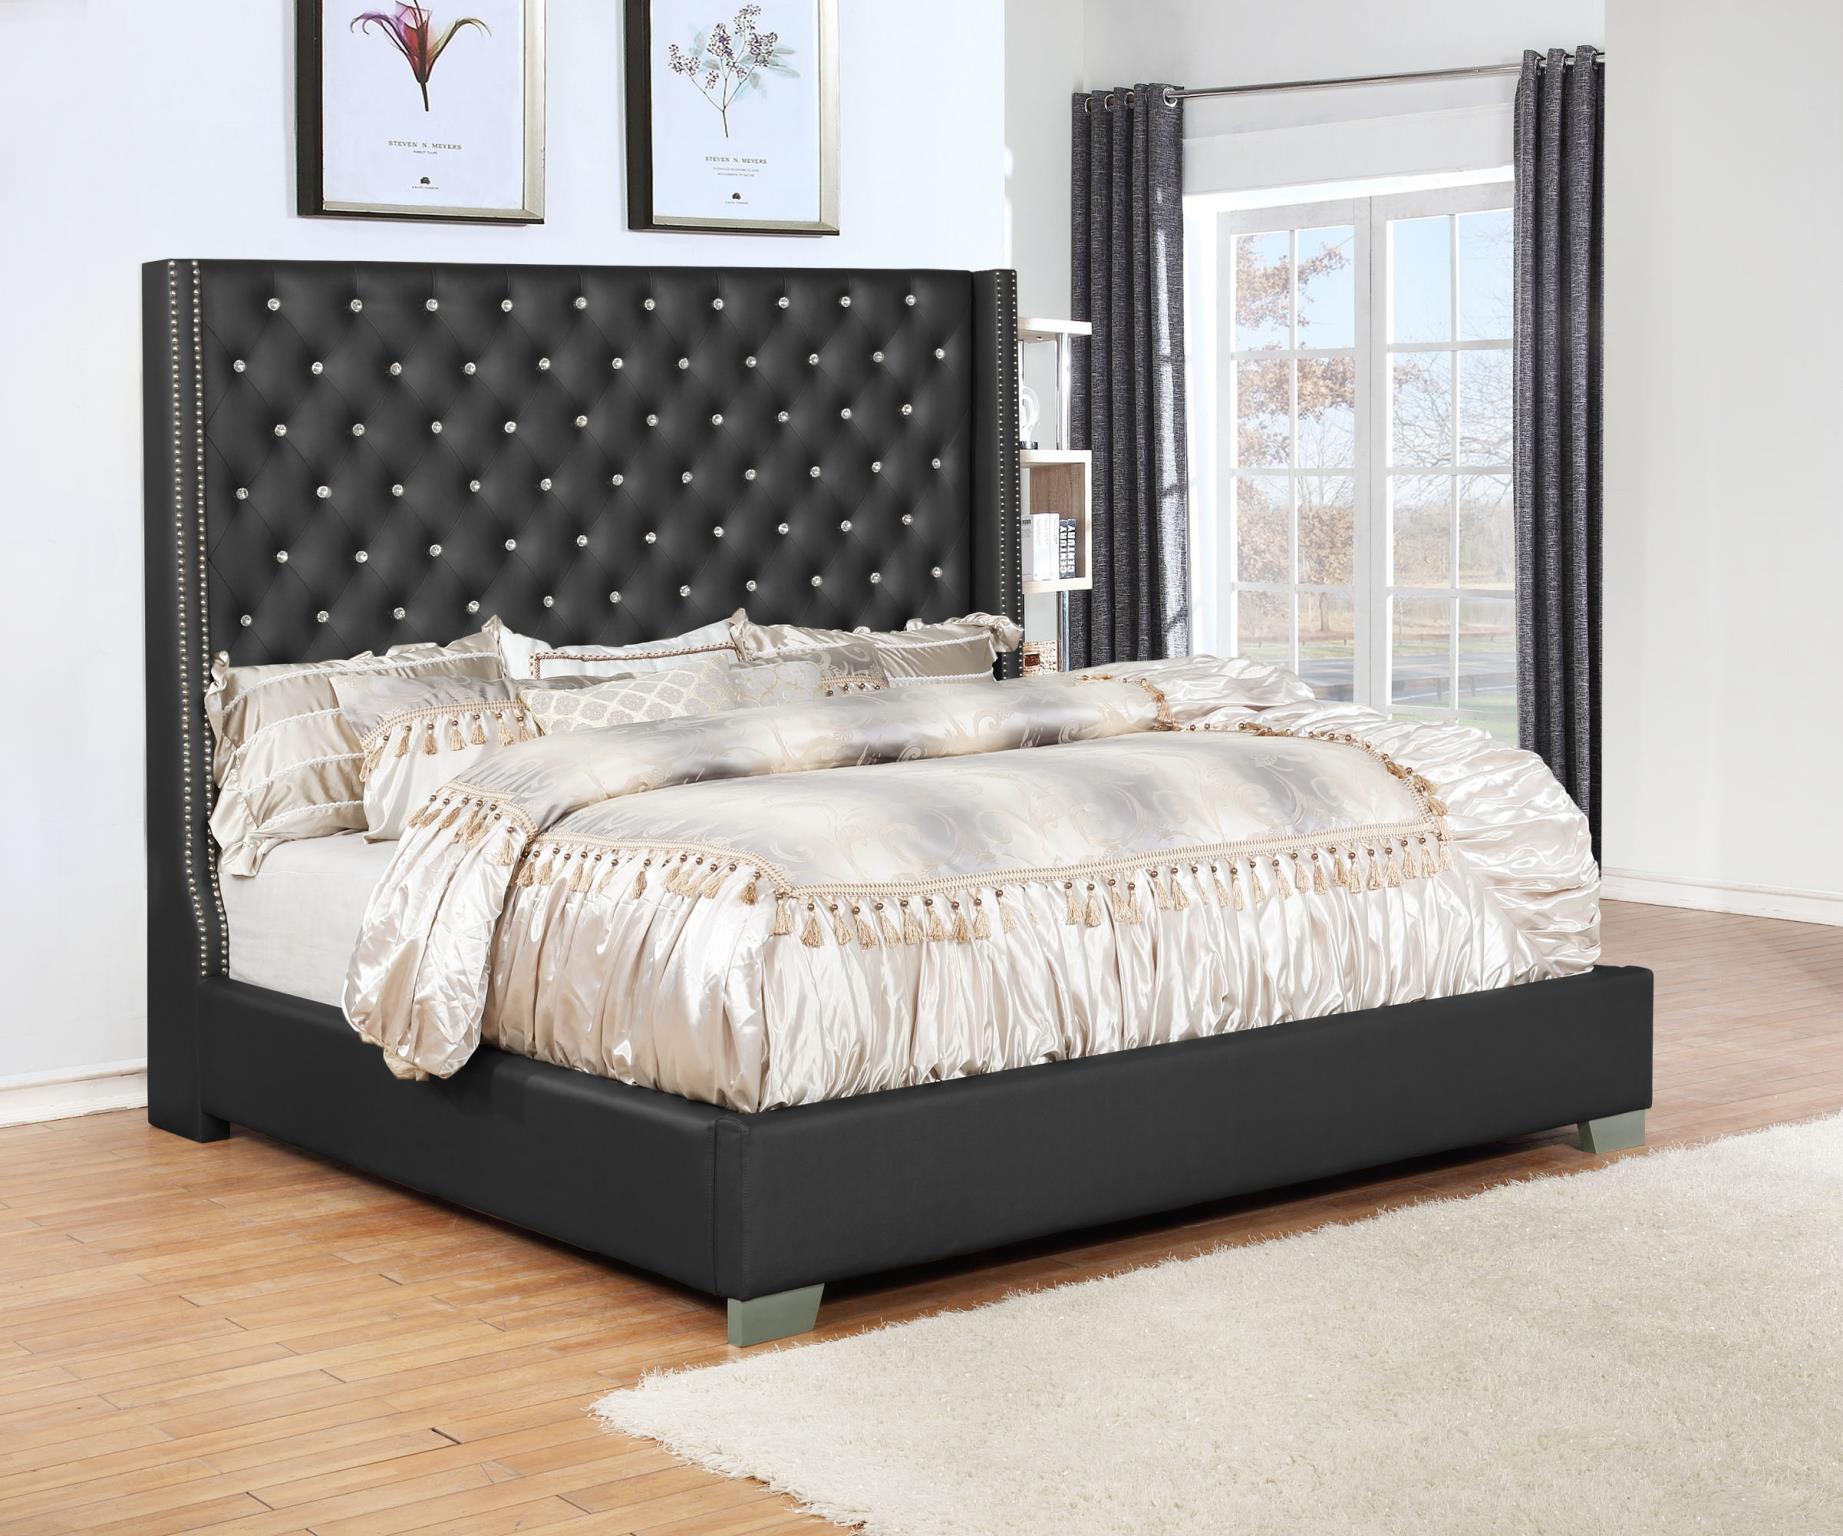 Hs 1pc Queen Size Bed Modern Black Pu, Black Headboard For Queen Size Bed